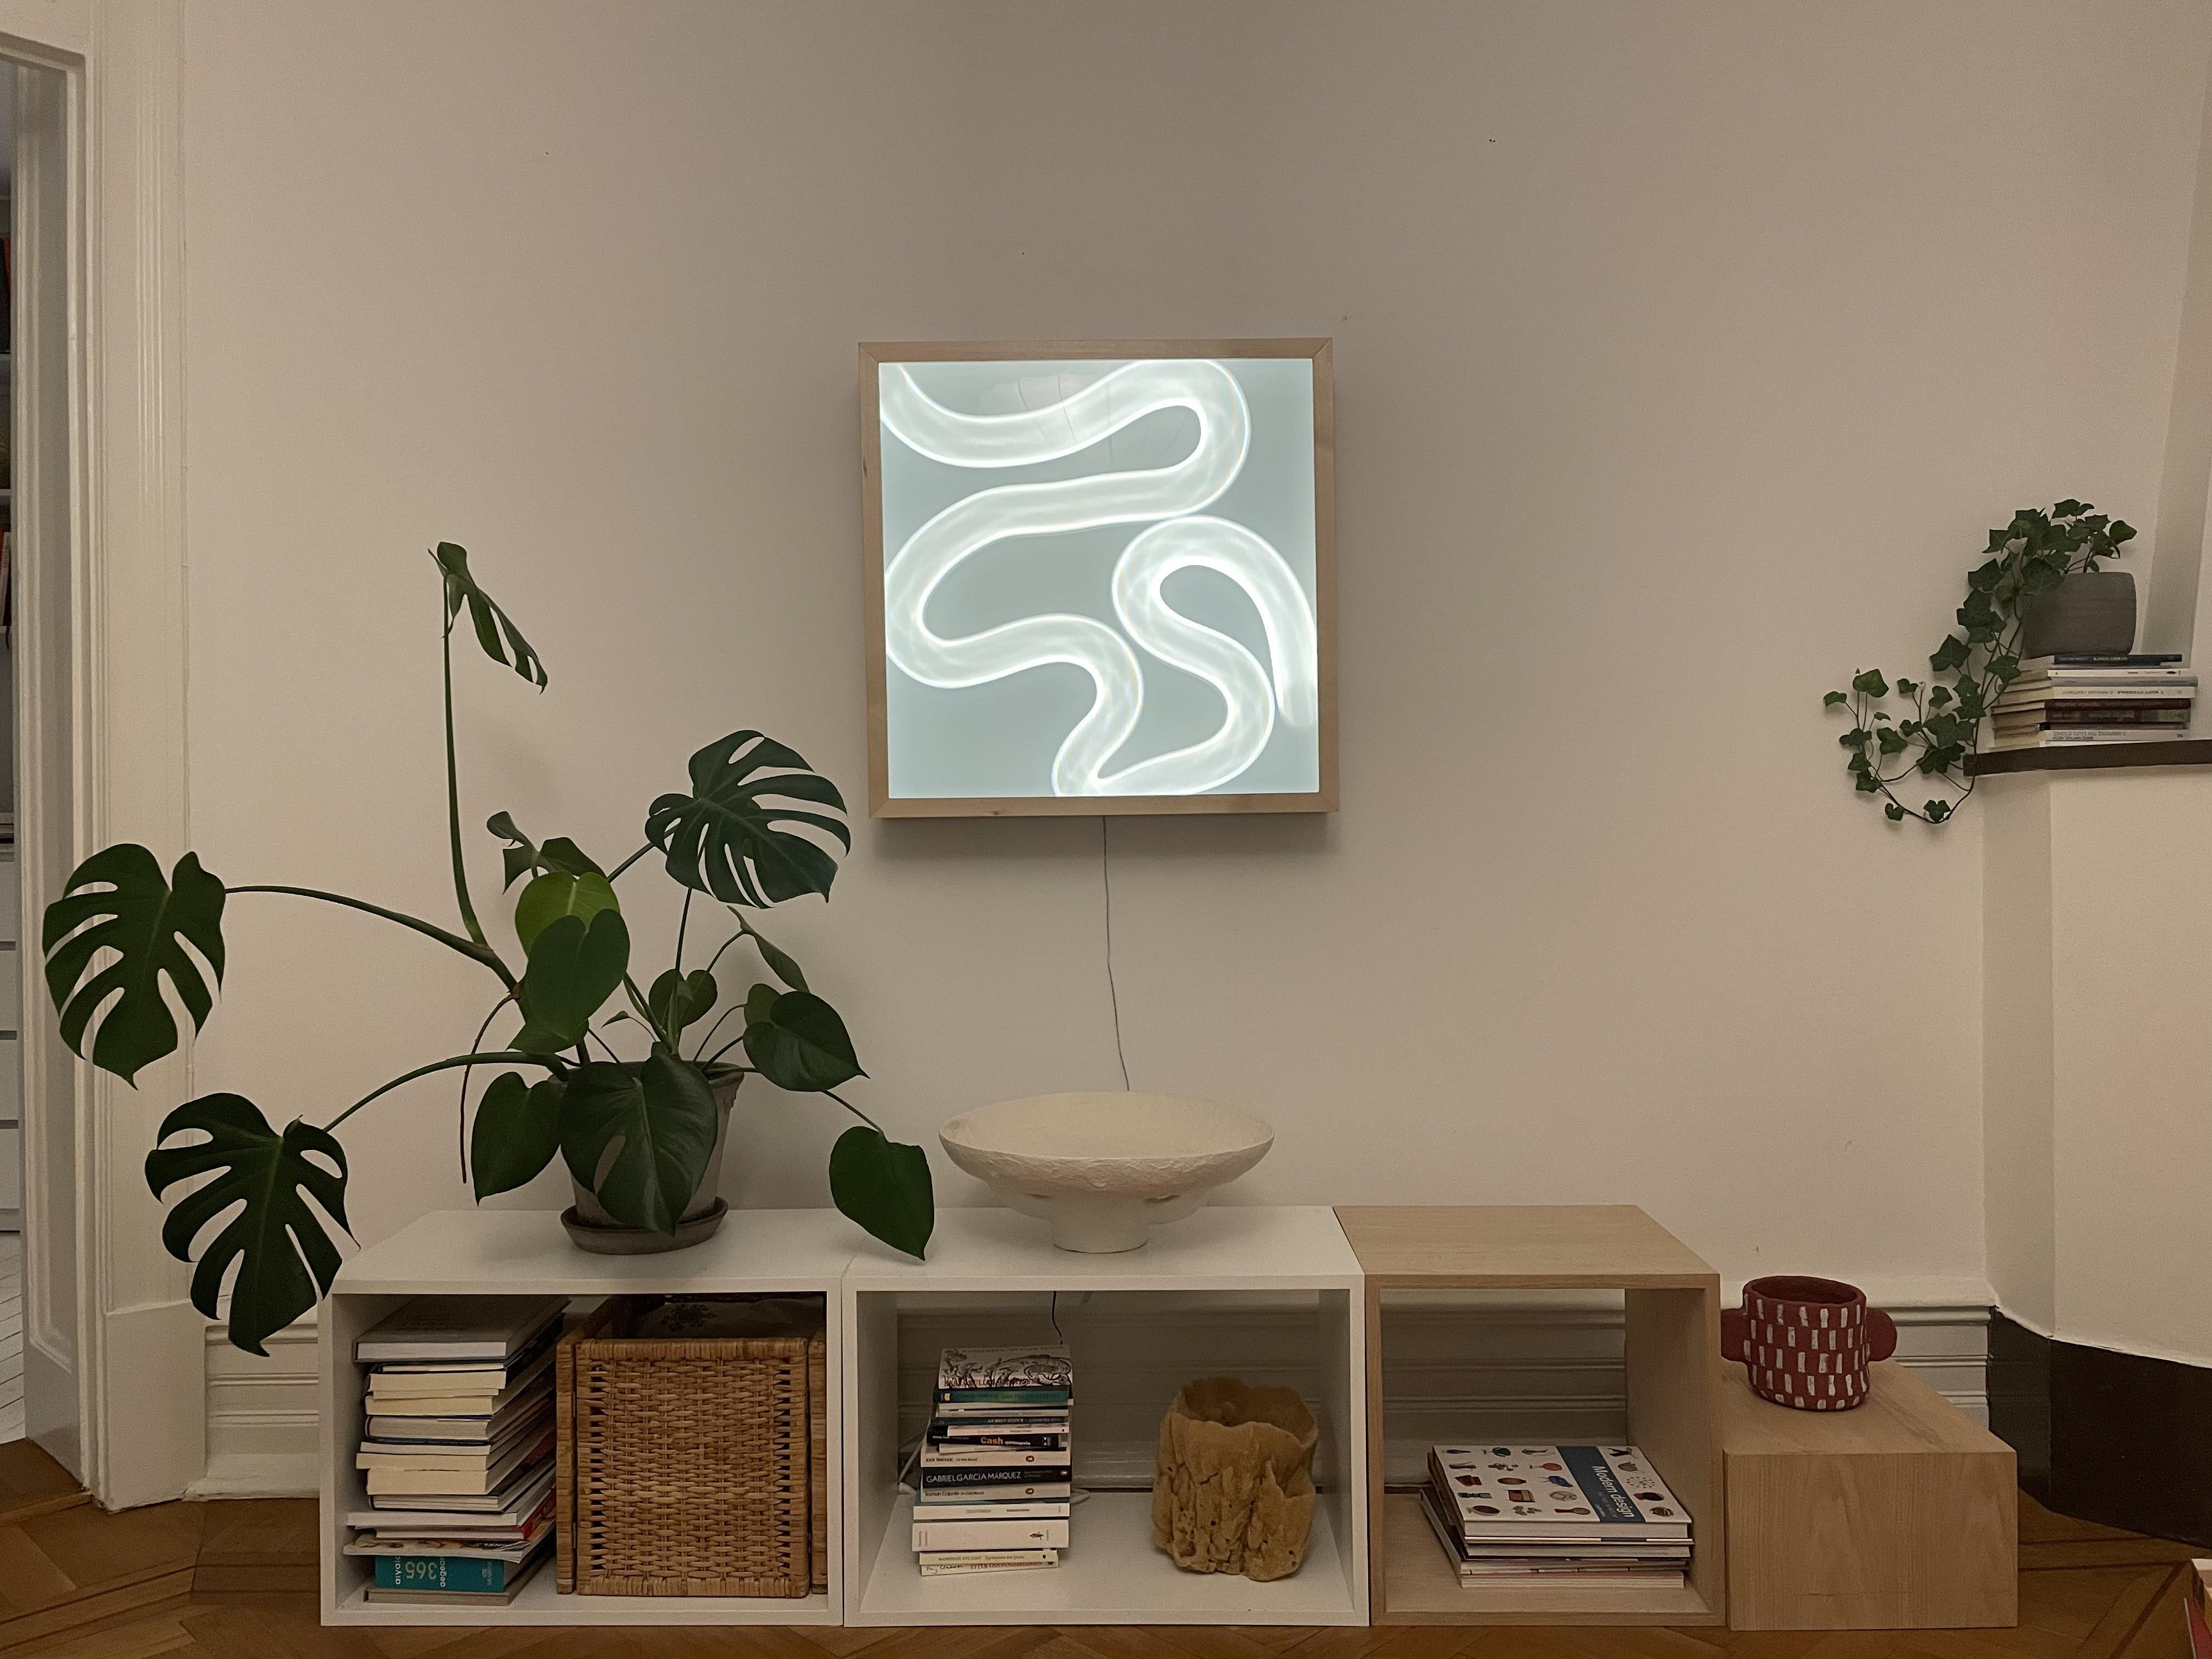 Swedish Aramse Light Sculpture by Studio Lampent For Sale